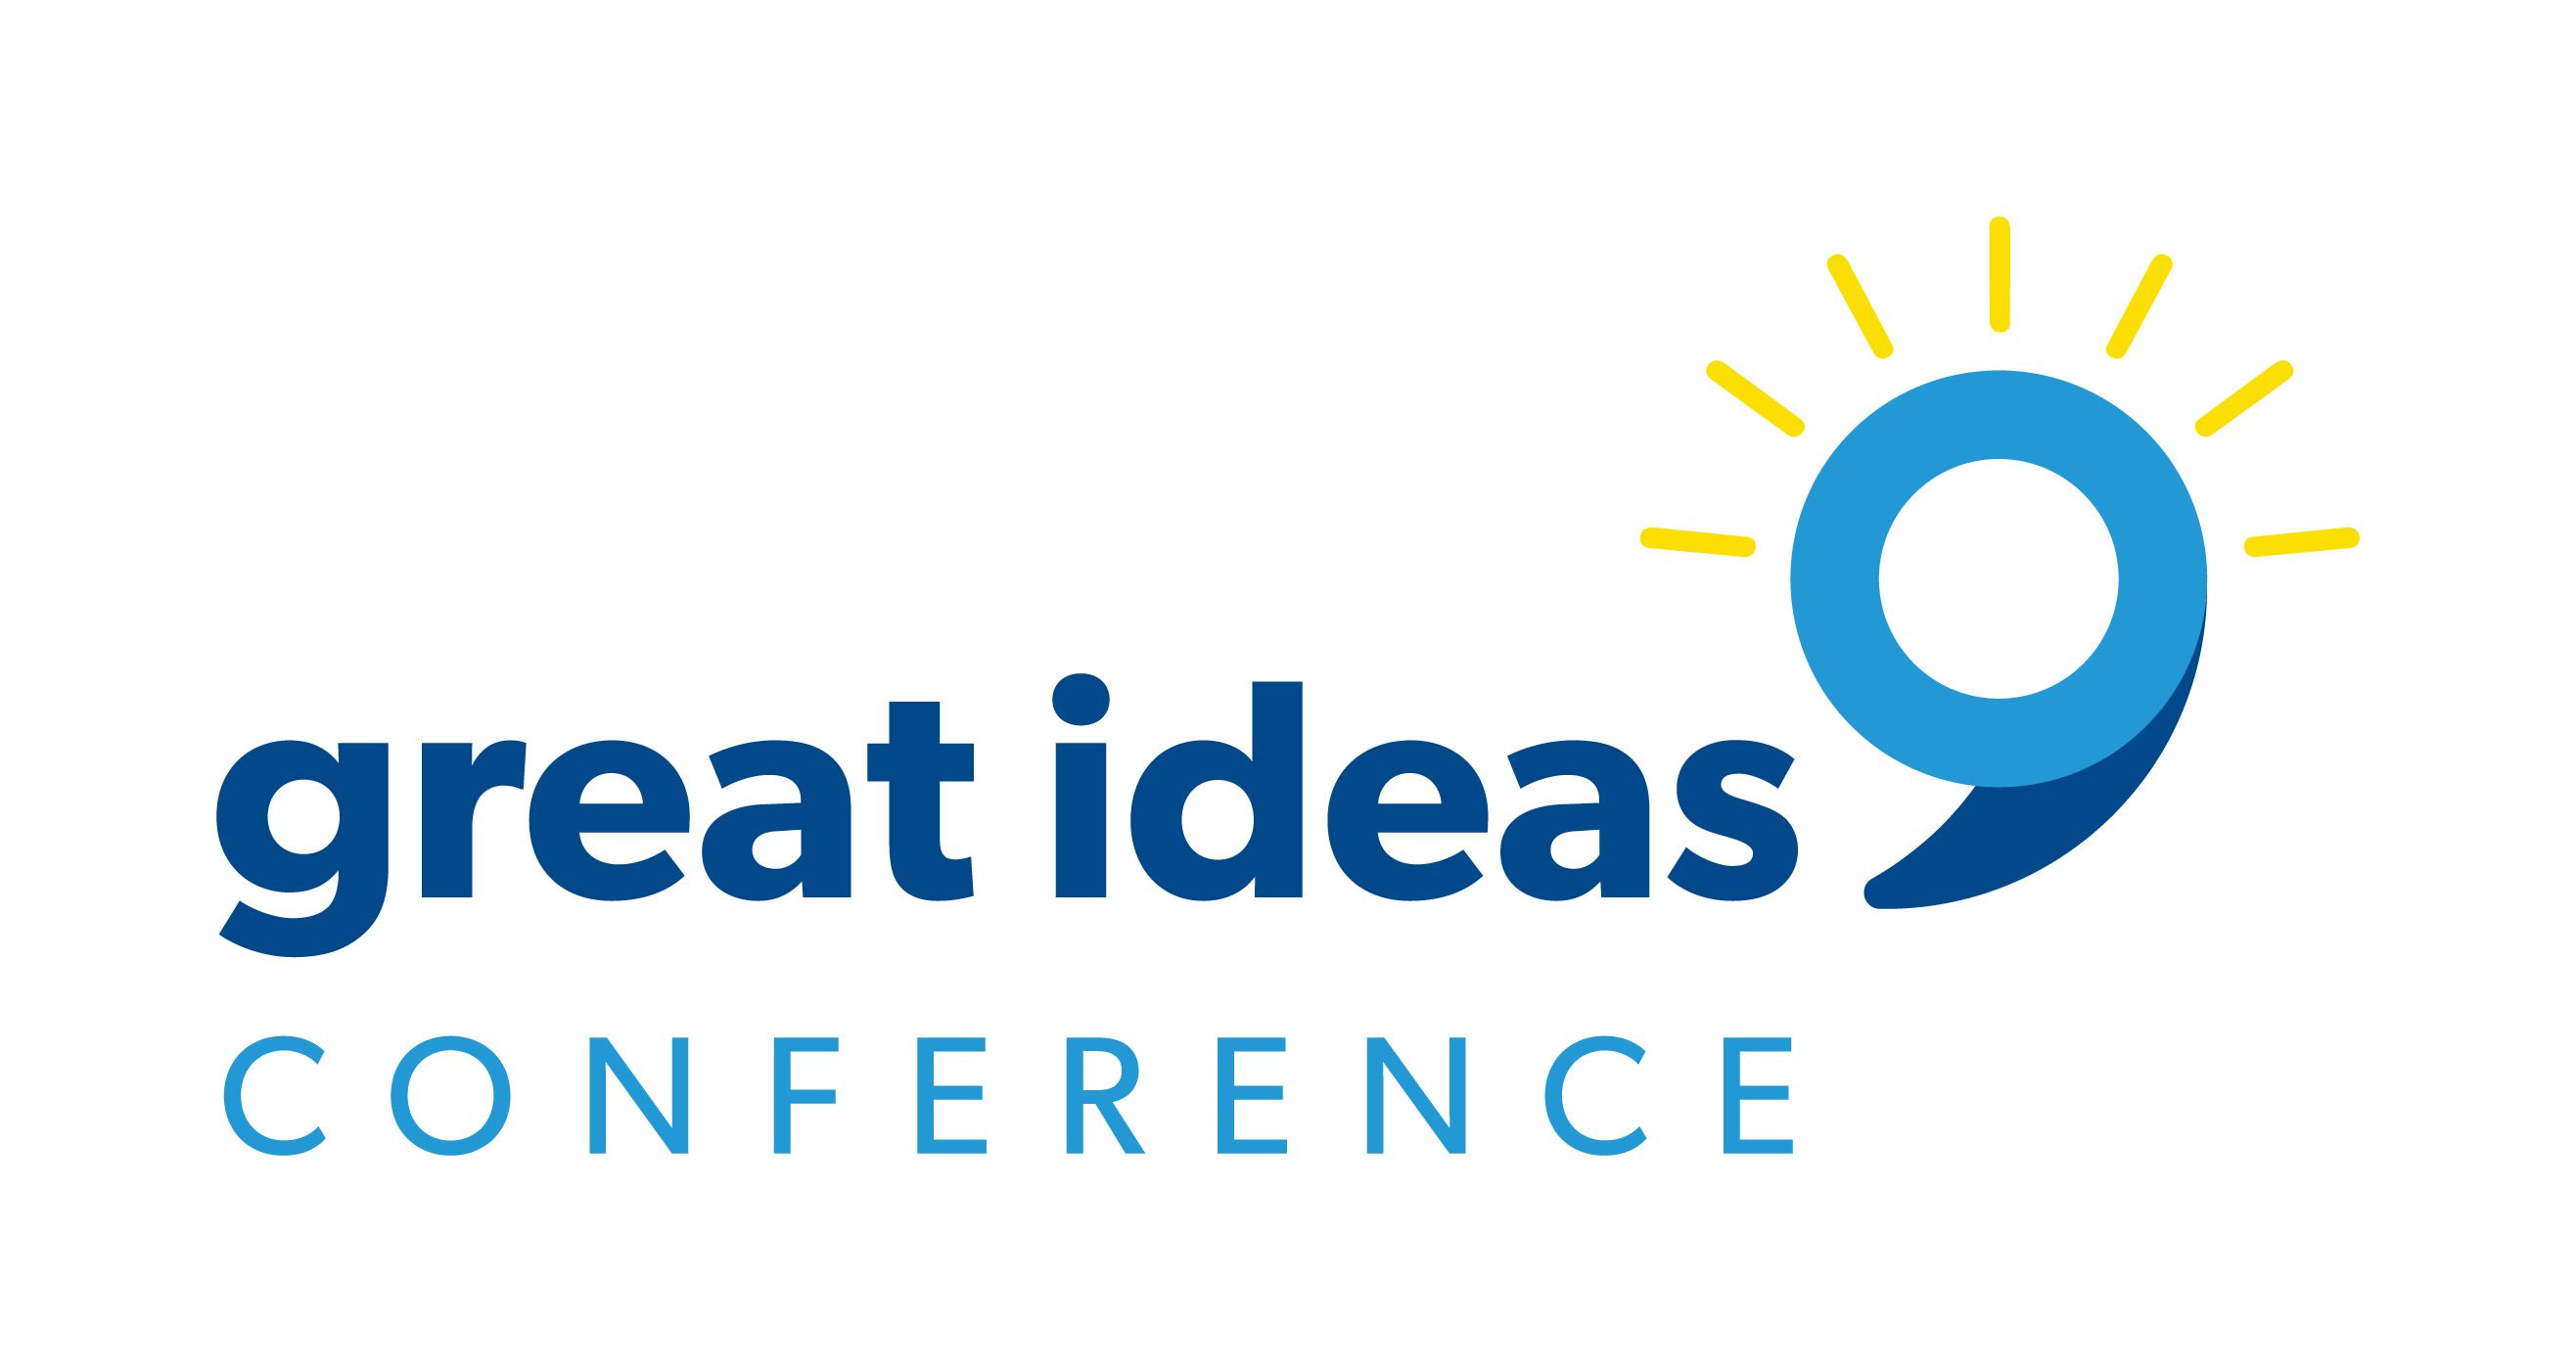 Great Ideas Conference logo